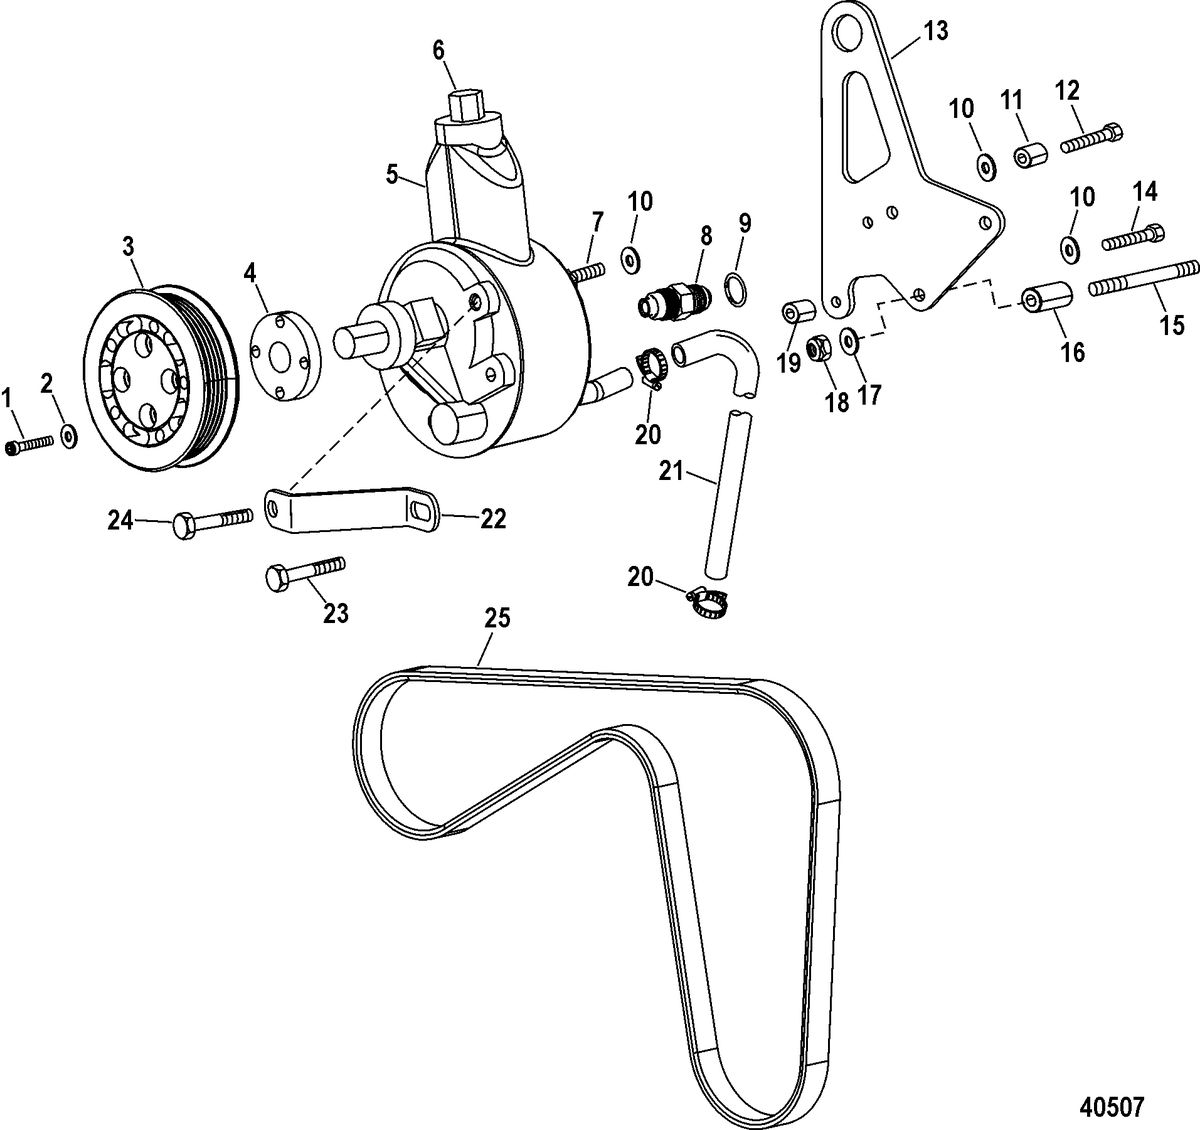 RACE STERNDRIVE 850/1025/1075/1200 SCI Power-Assisted Steering Components